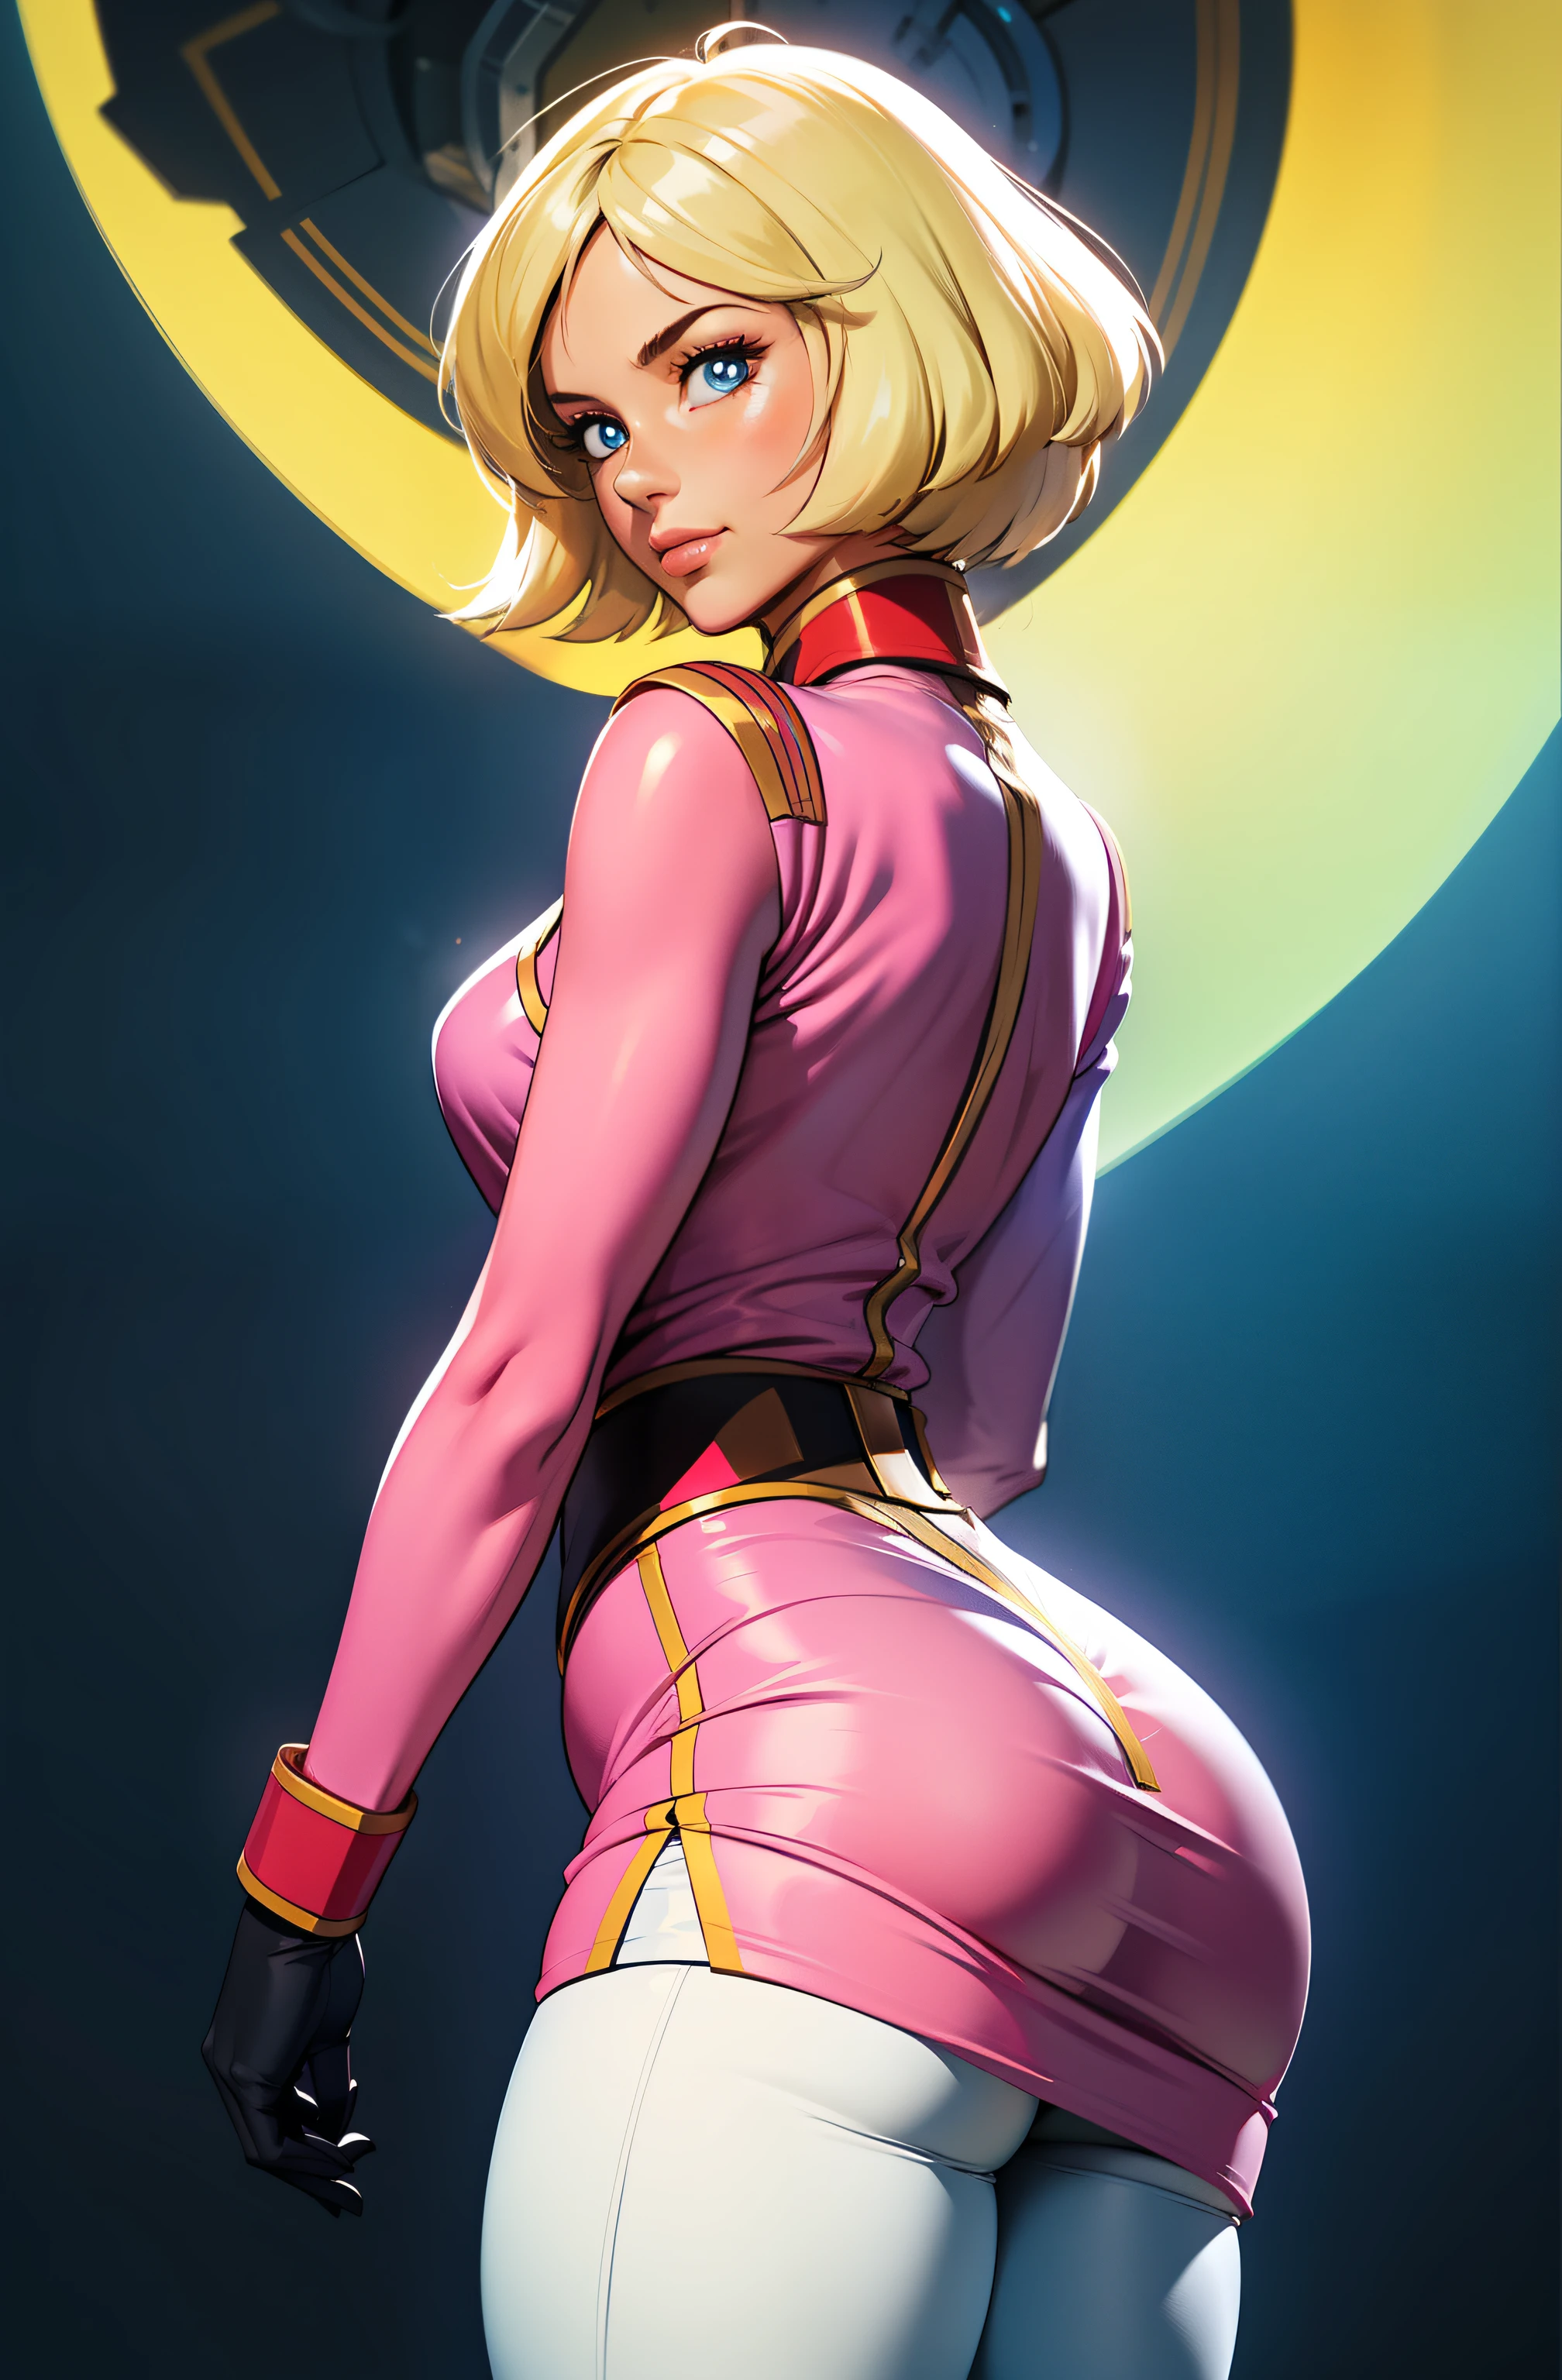 ((masterpiece)), ((cinematic lighting)), realistic photo、Real Images、Top image quality、1girl in, sayla mass, Elegant, masterpiece, Convoluted, slim arms, wide hips, thick thighs, thigh gaps, Best Quality, absurderes, high face detail, Perfect eyes, mature, Cowboy Shot, , Vibrant colors, soft pink uniform, soft pink Skirt, white tights, side view, shapely butt